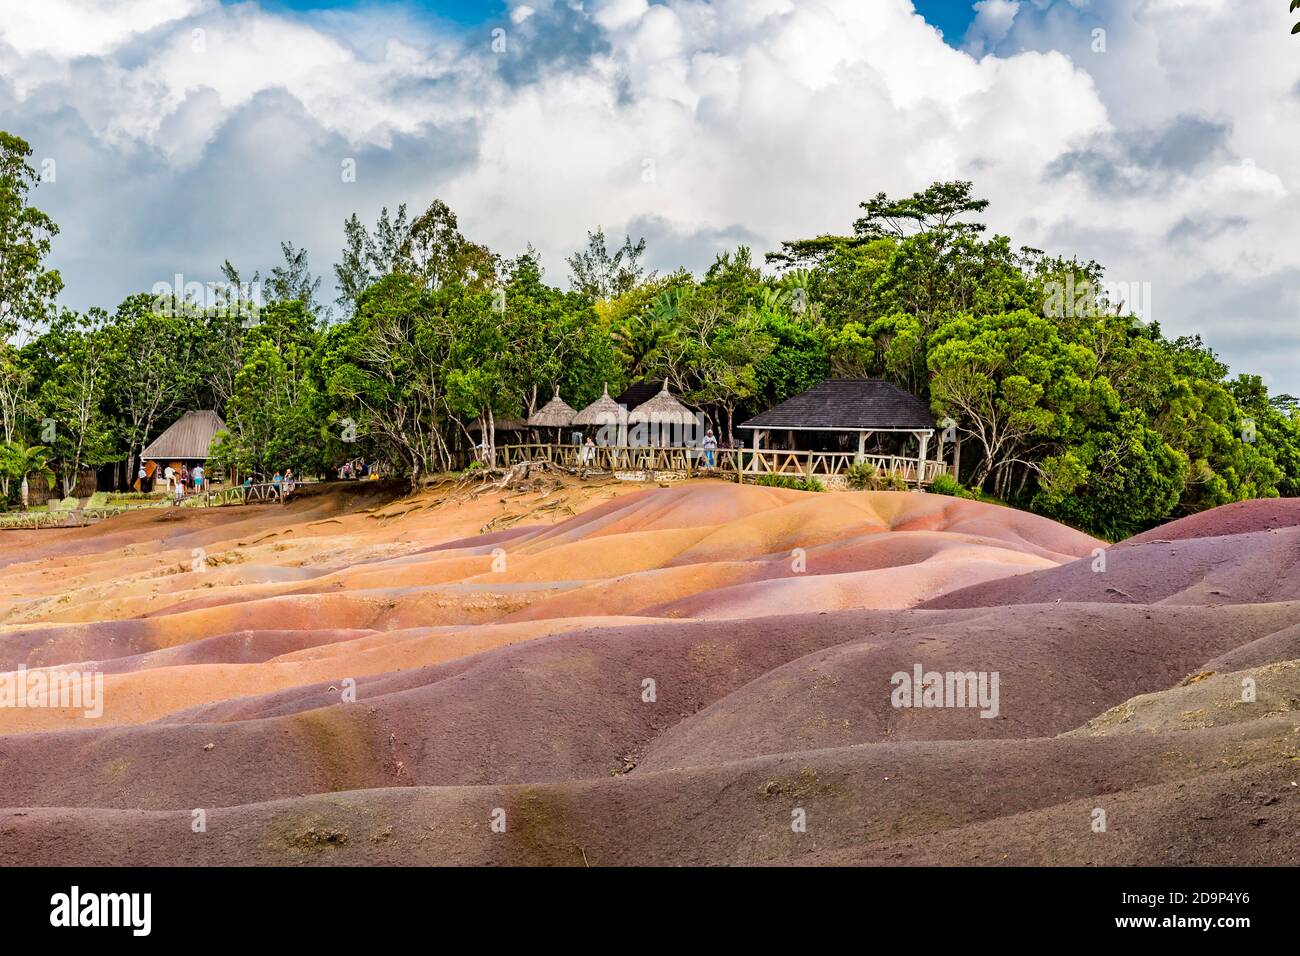 Seven Colored Earth, Terres des Sept Couleurs, Chamarel, Seven Colored Earths, Mauritius, Africa, Indian Ocean Stock Photo